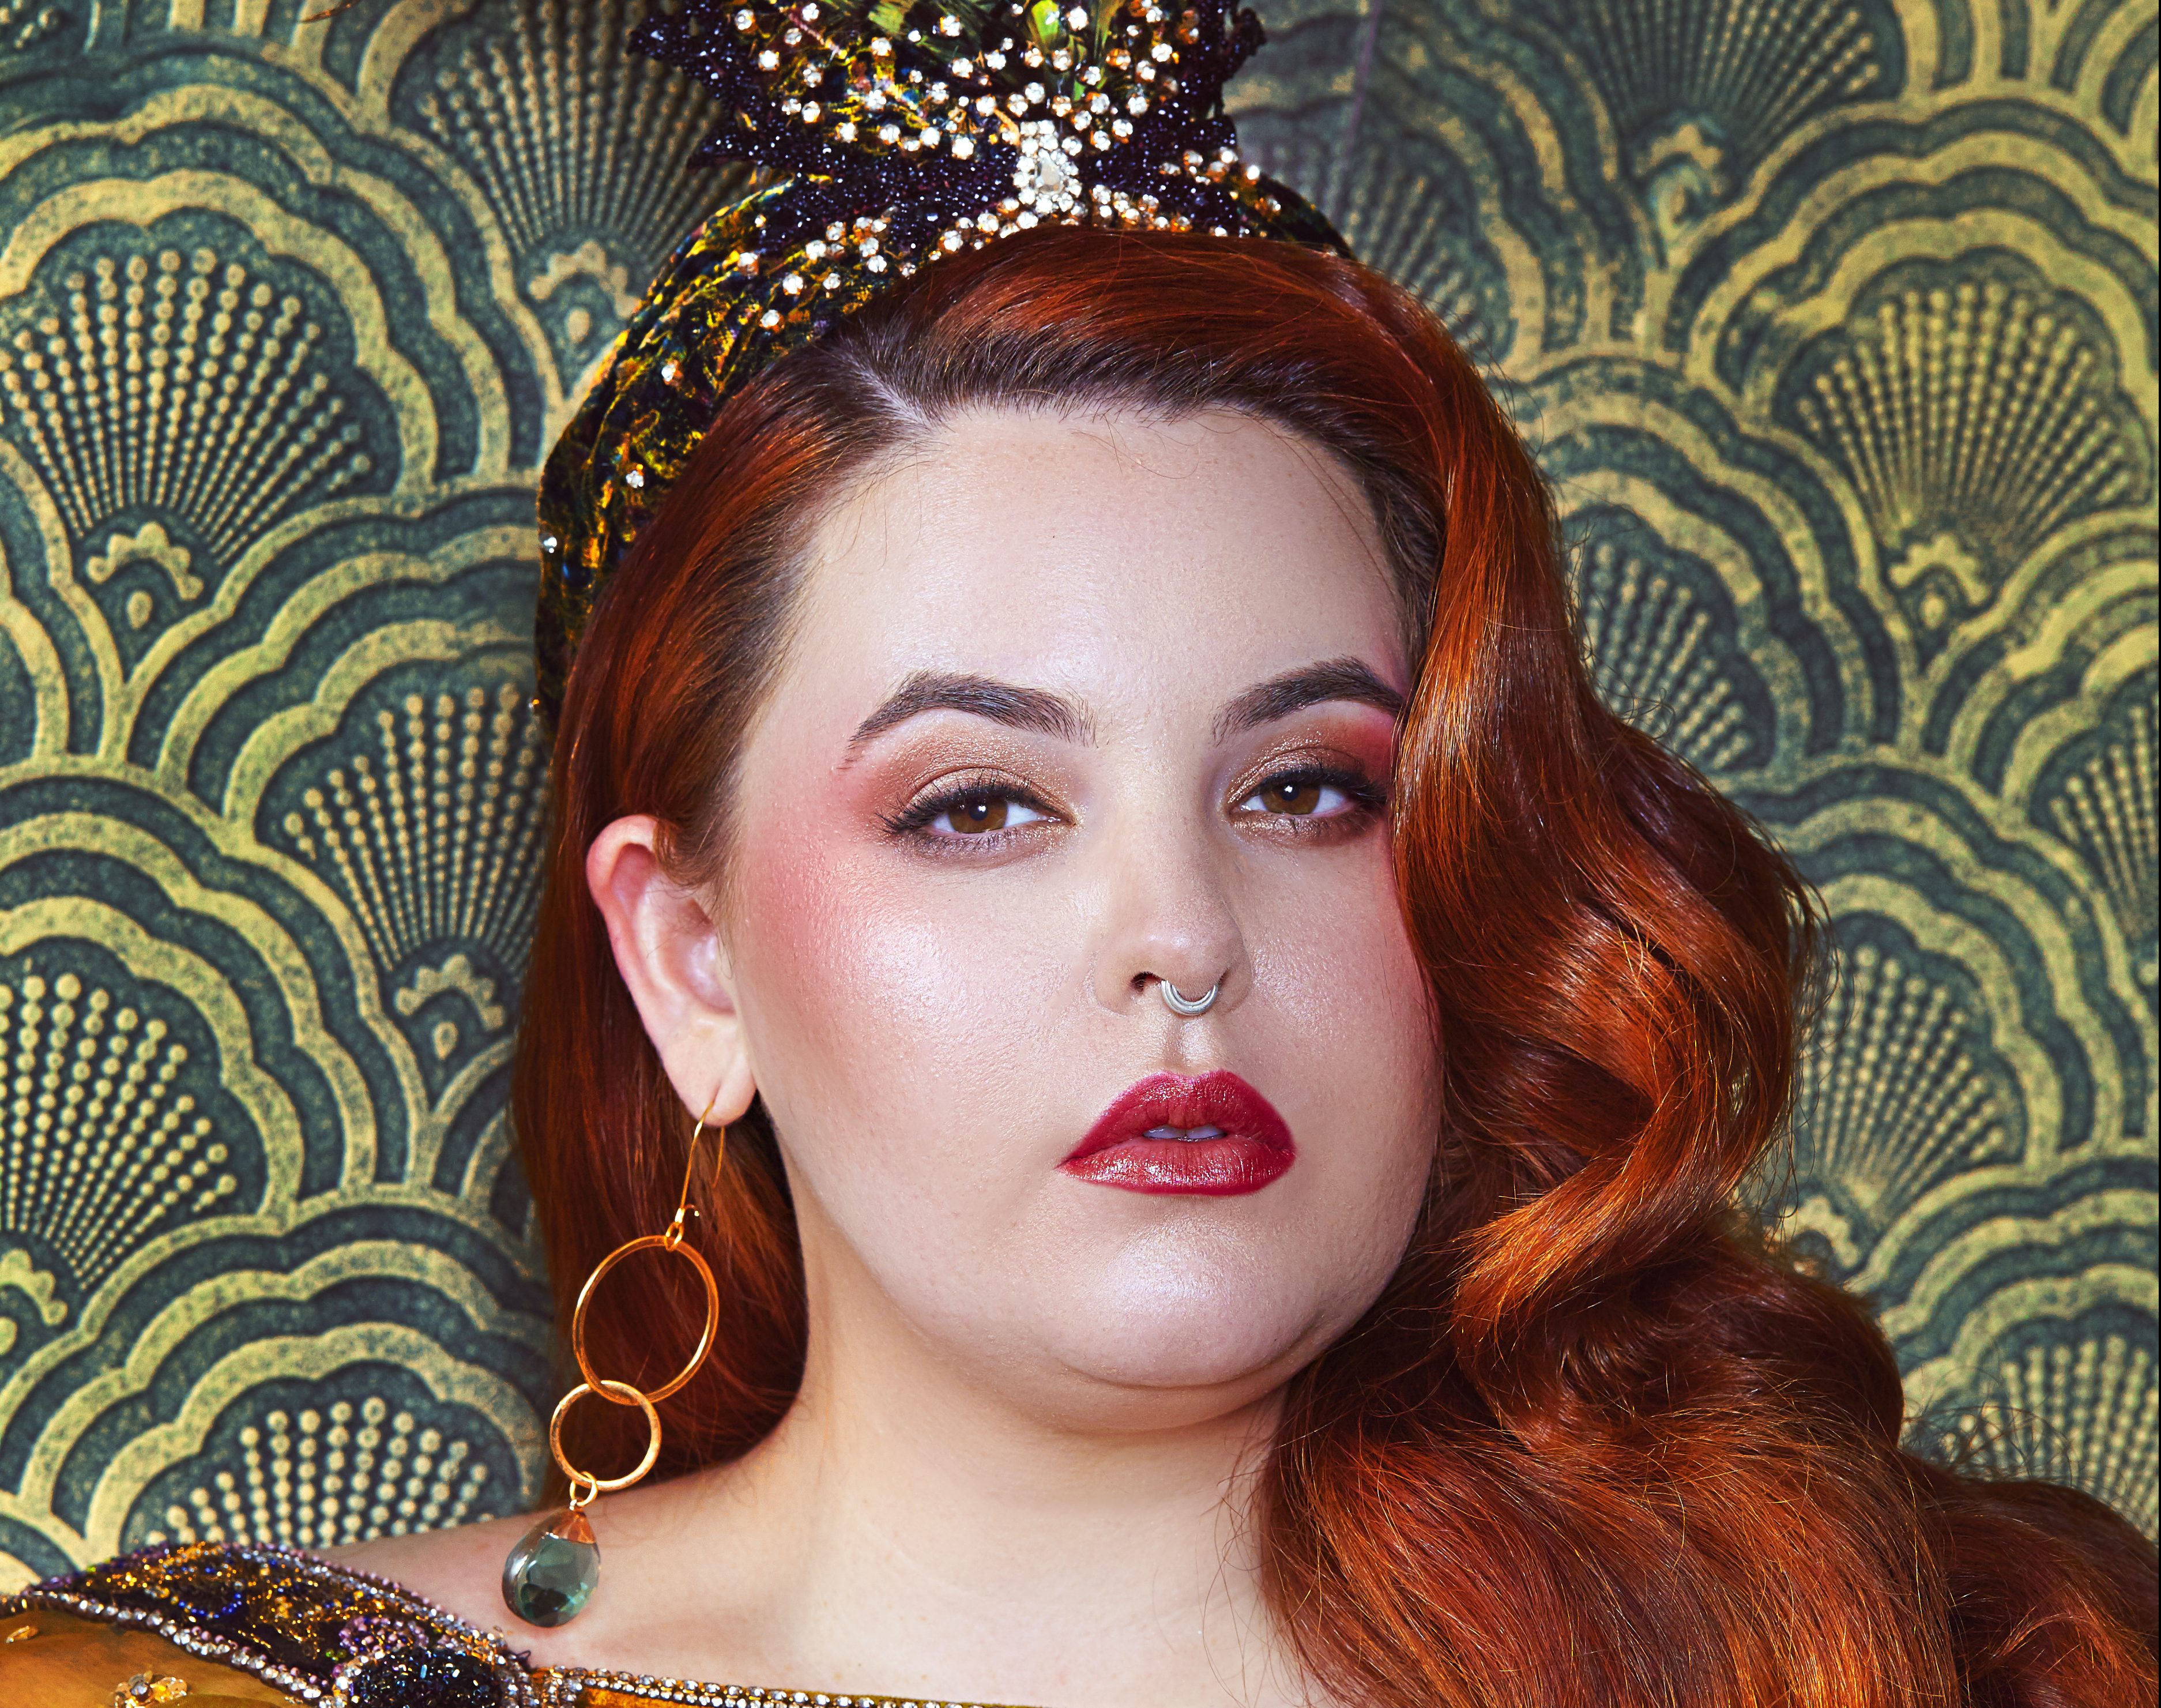 Tess Holliday – On The Path To Becoming Brazen